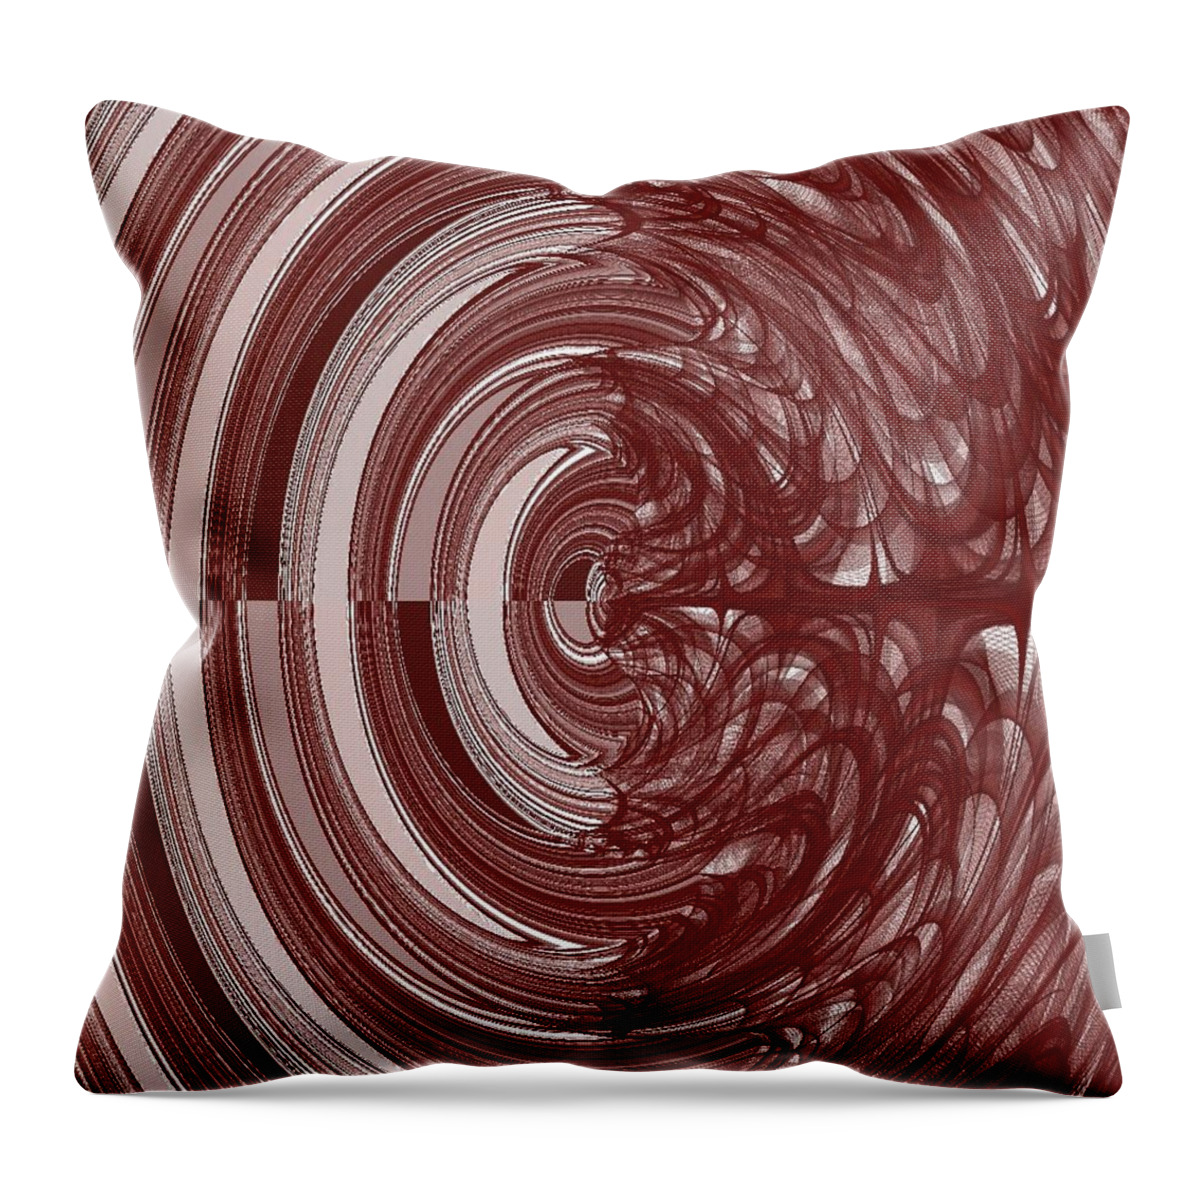 Red Throw Pillow featuring the mixed media The Two Sides Of Myeloma by Marian Lonzetta